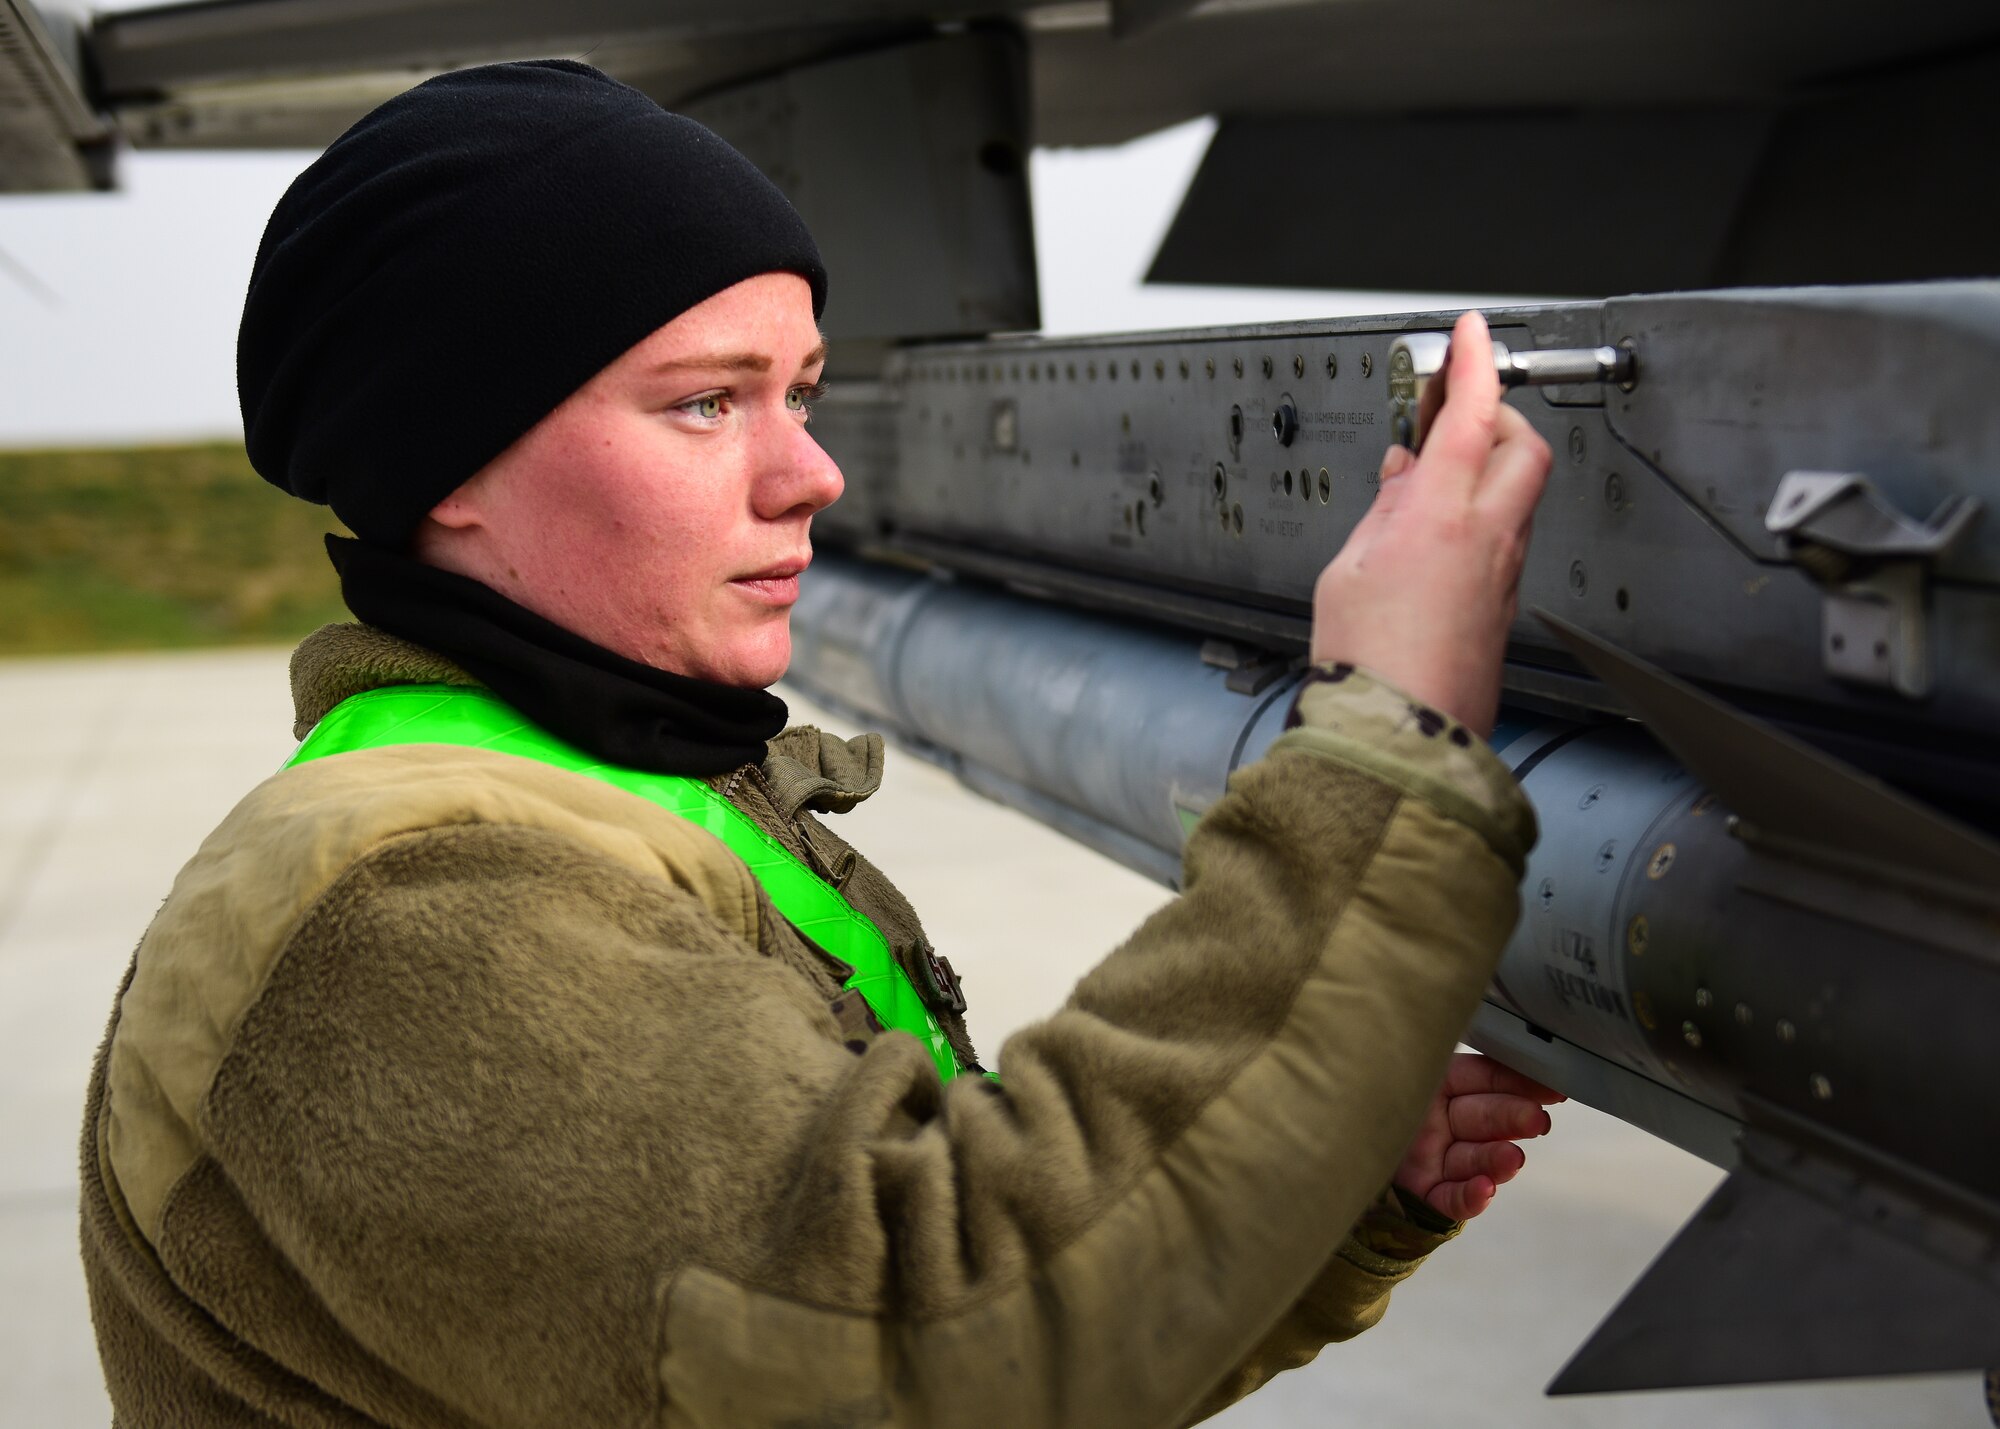 Senior Airman Kiara Beyer, 555th Aircraft Maintenance Unit weapons load crew member from the 31st Fighter Wing, Aviano Air Base, Italy, checks the security of munitions on a U.S. Air Force F-16C Fighting Falcon at Croatia’s 91st Air Base at Pleso, March 17, 2022. The 31st FW executed routine Agile Combat Employment operations with Croatian Allies. Missions such as these enhance the readiness necessary to respond to any potential challenge in Southeast Europe. (U.S. Air Force photo by Tech. Sgt. Miquel Jordan)